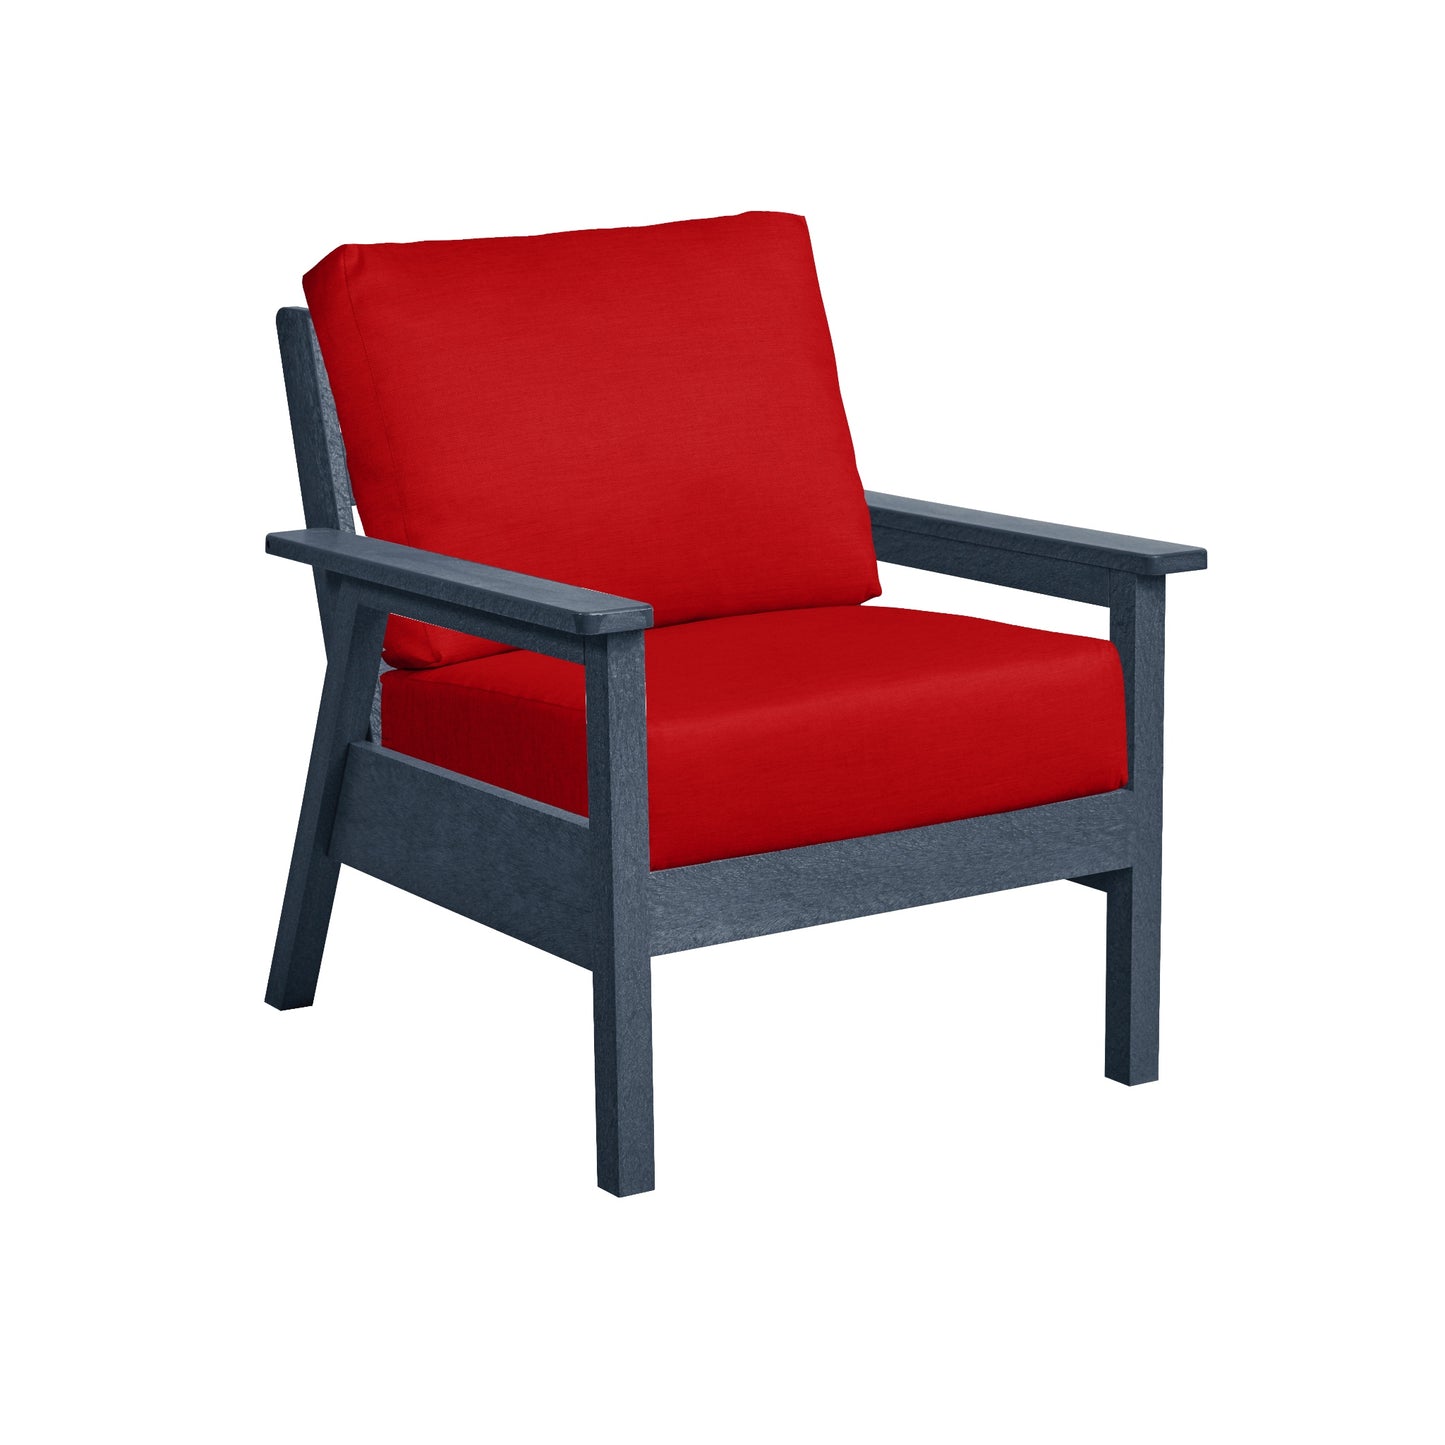 Tofino Chair SLATE FRAME WITH CUSHIONS - DSF281 [DSF241]